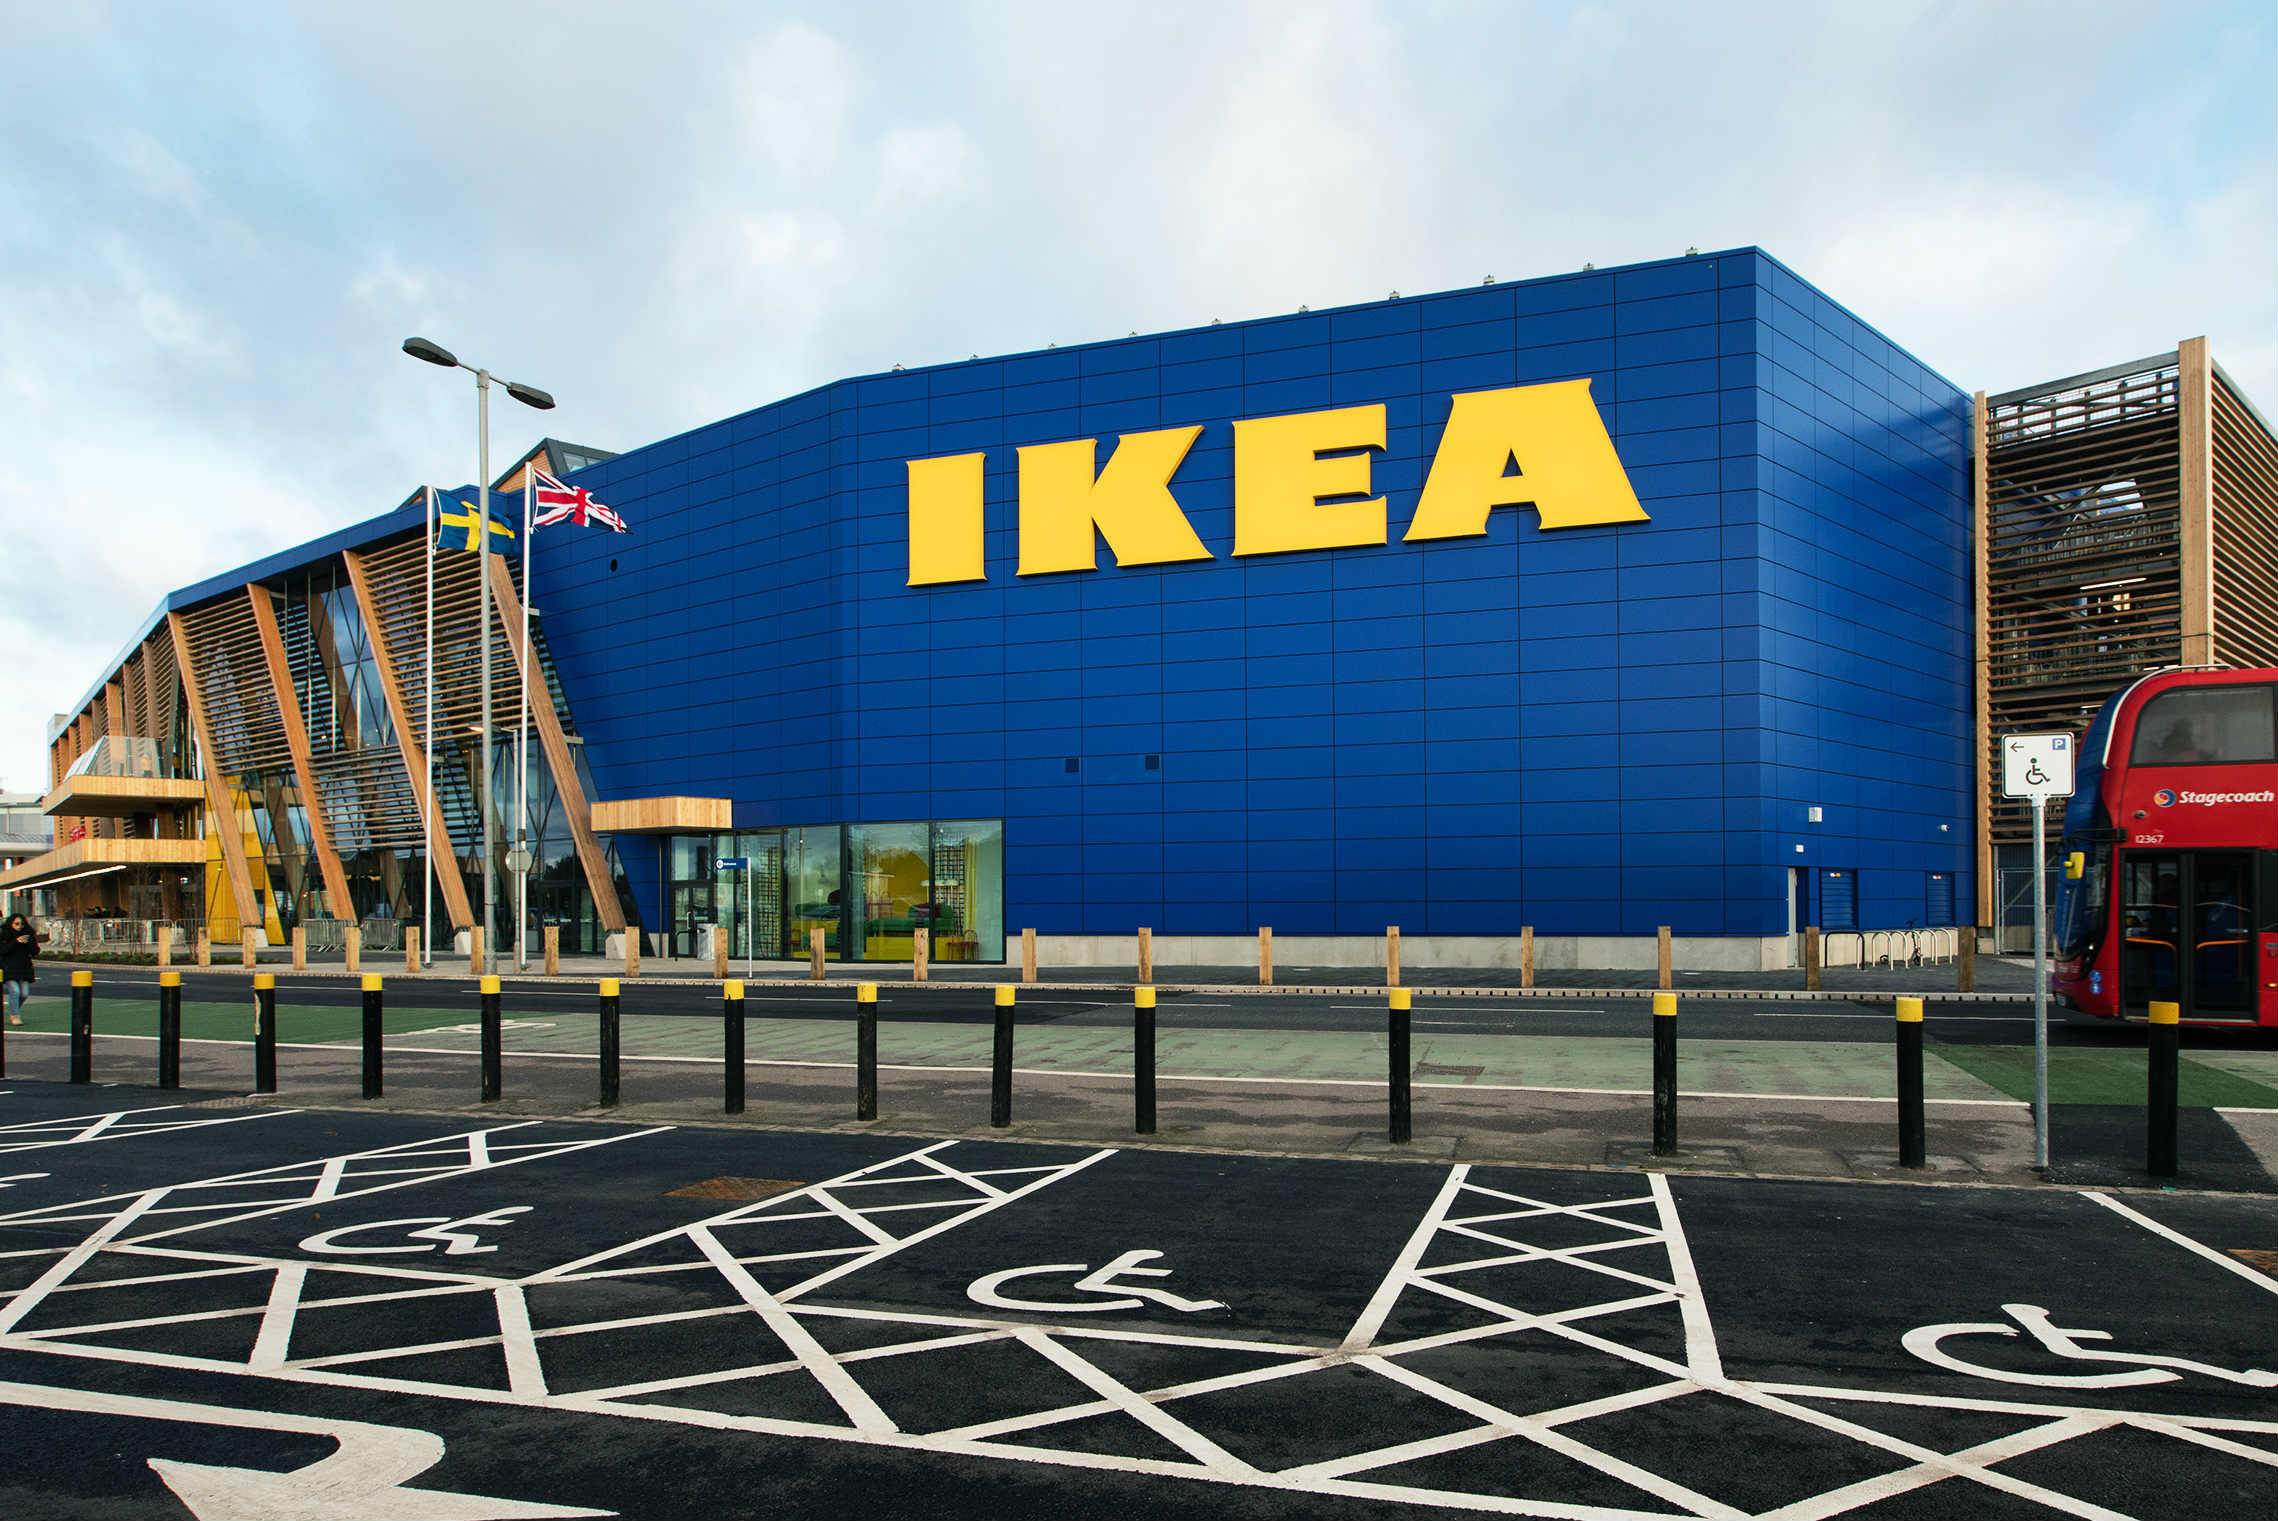 Ikea: The world's largest furniture retailer, Founded in 1942, Furniture store. 2280x1530 HD Wallpaper.